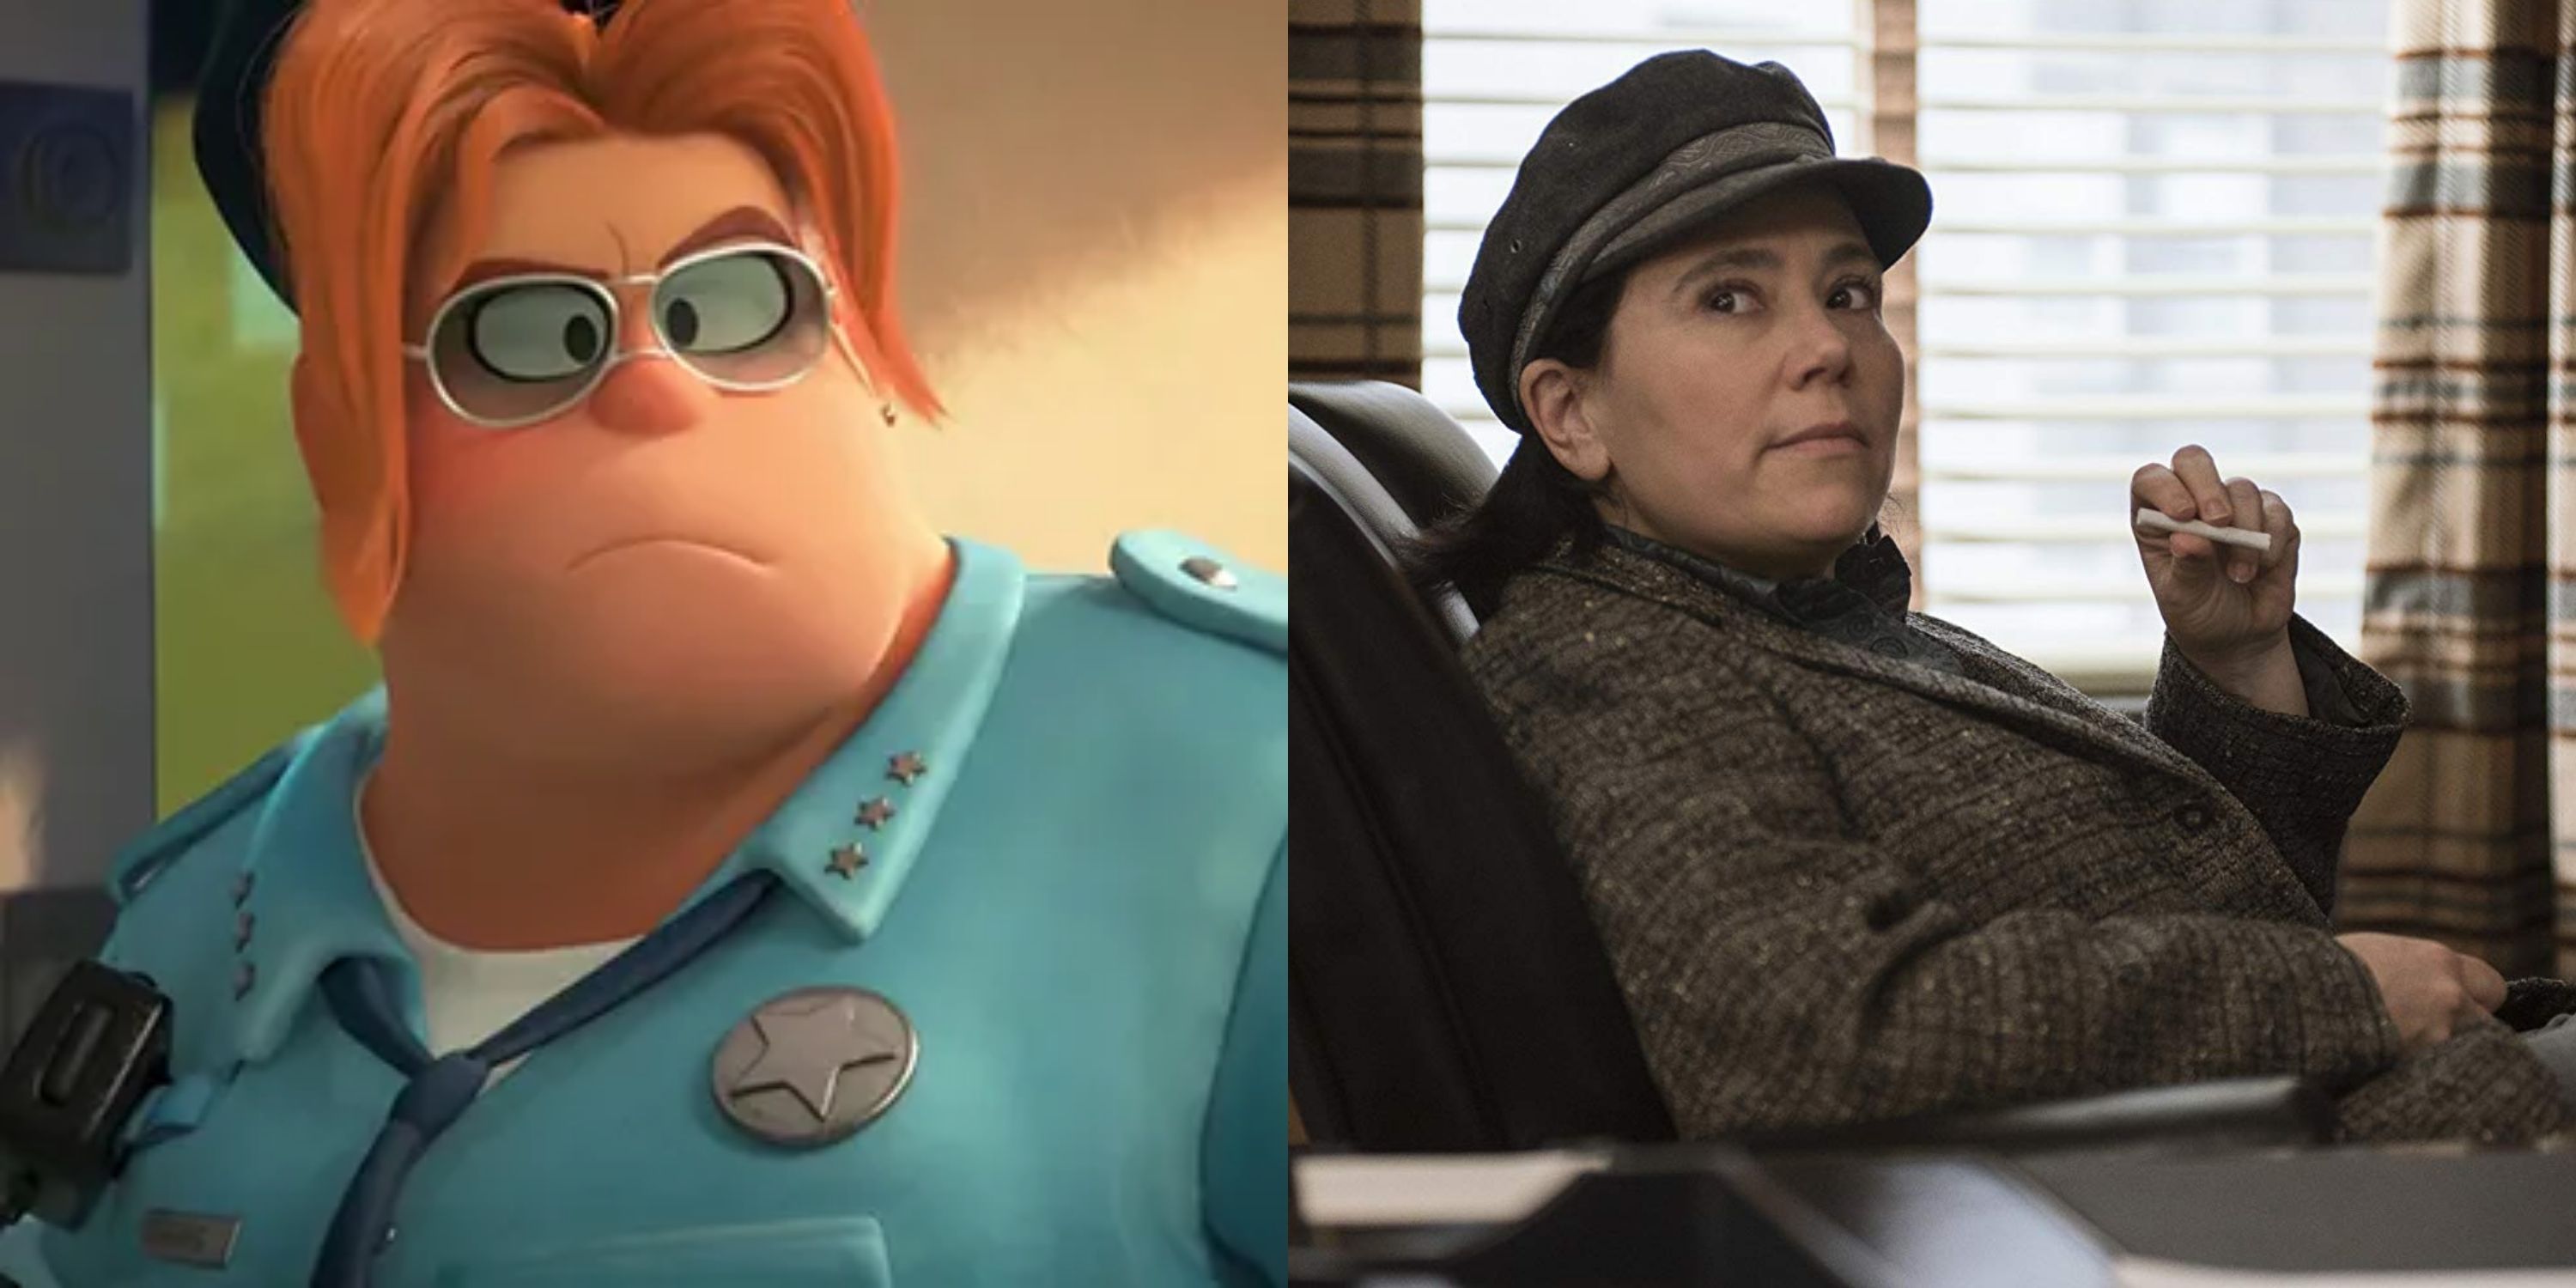 Alex Borstein as Misty Luggins in The Bad Guys and The Marvelous Mrs. Maisel